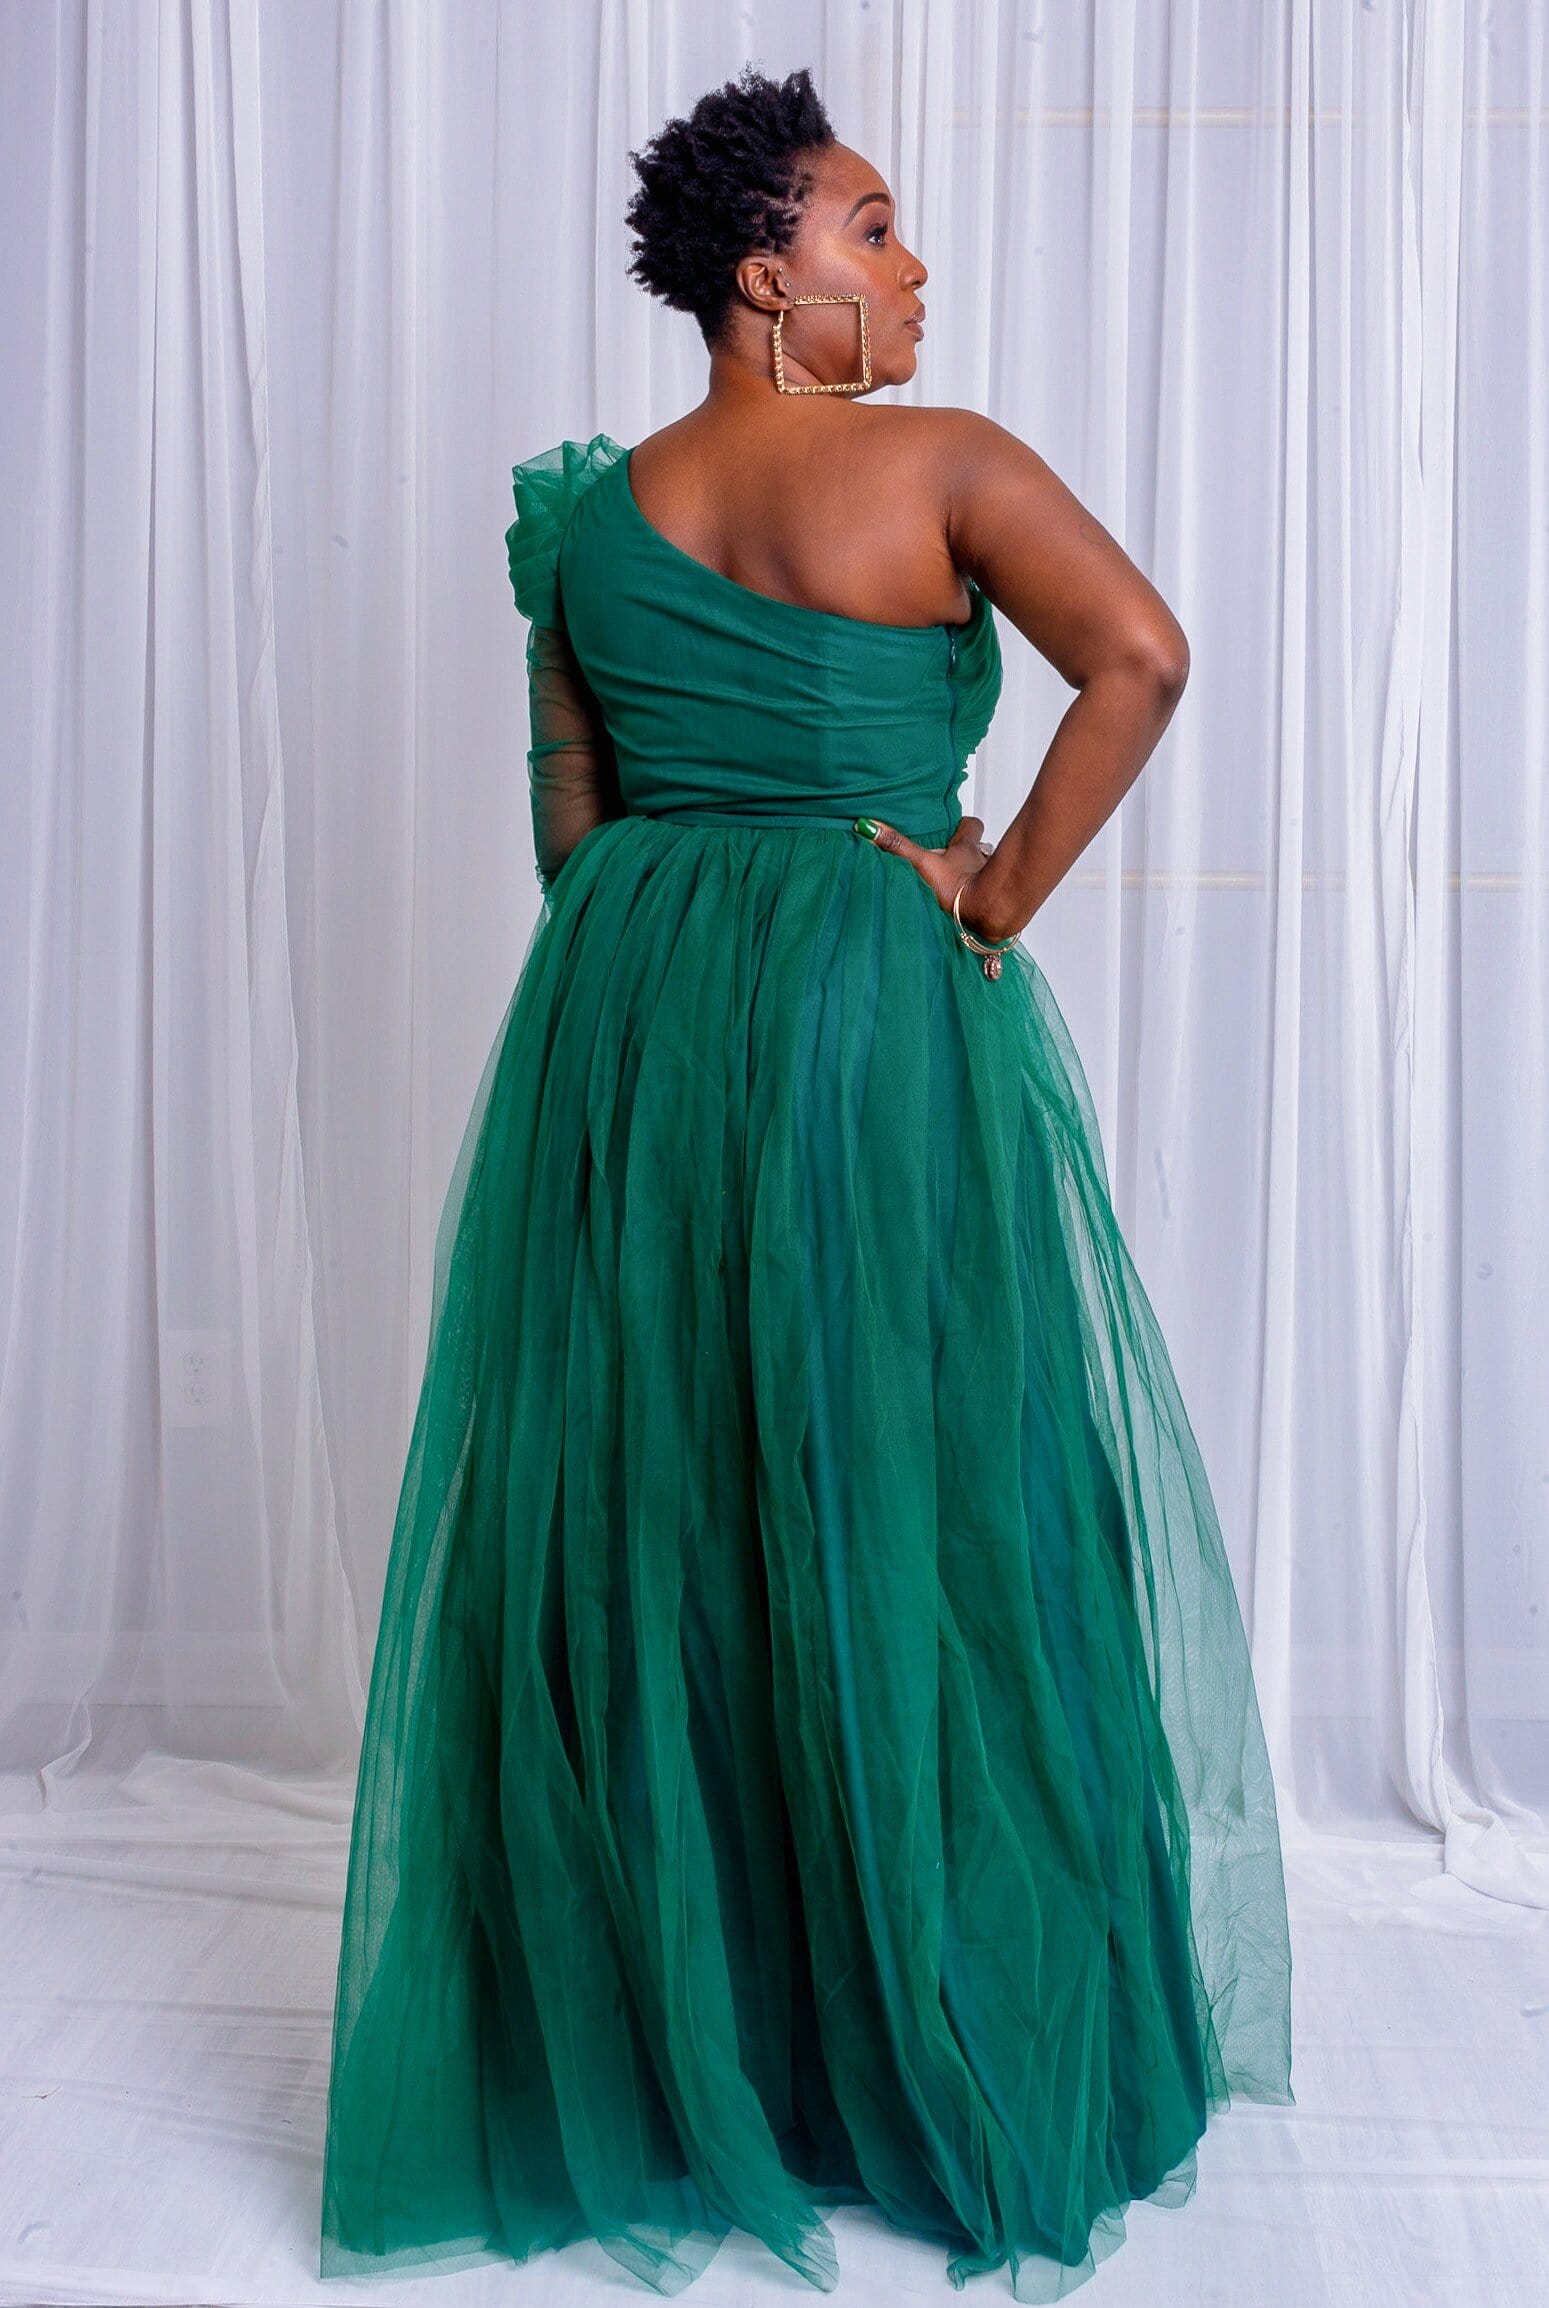 One Shoulder Tulle Dress (Green) small to 3XL - Kois Kloset